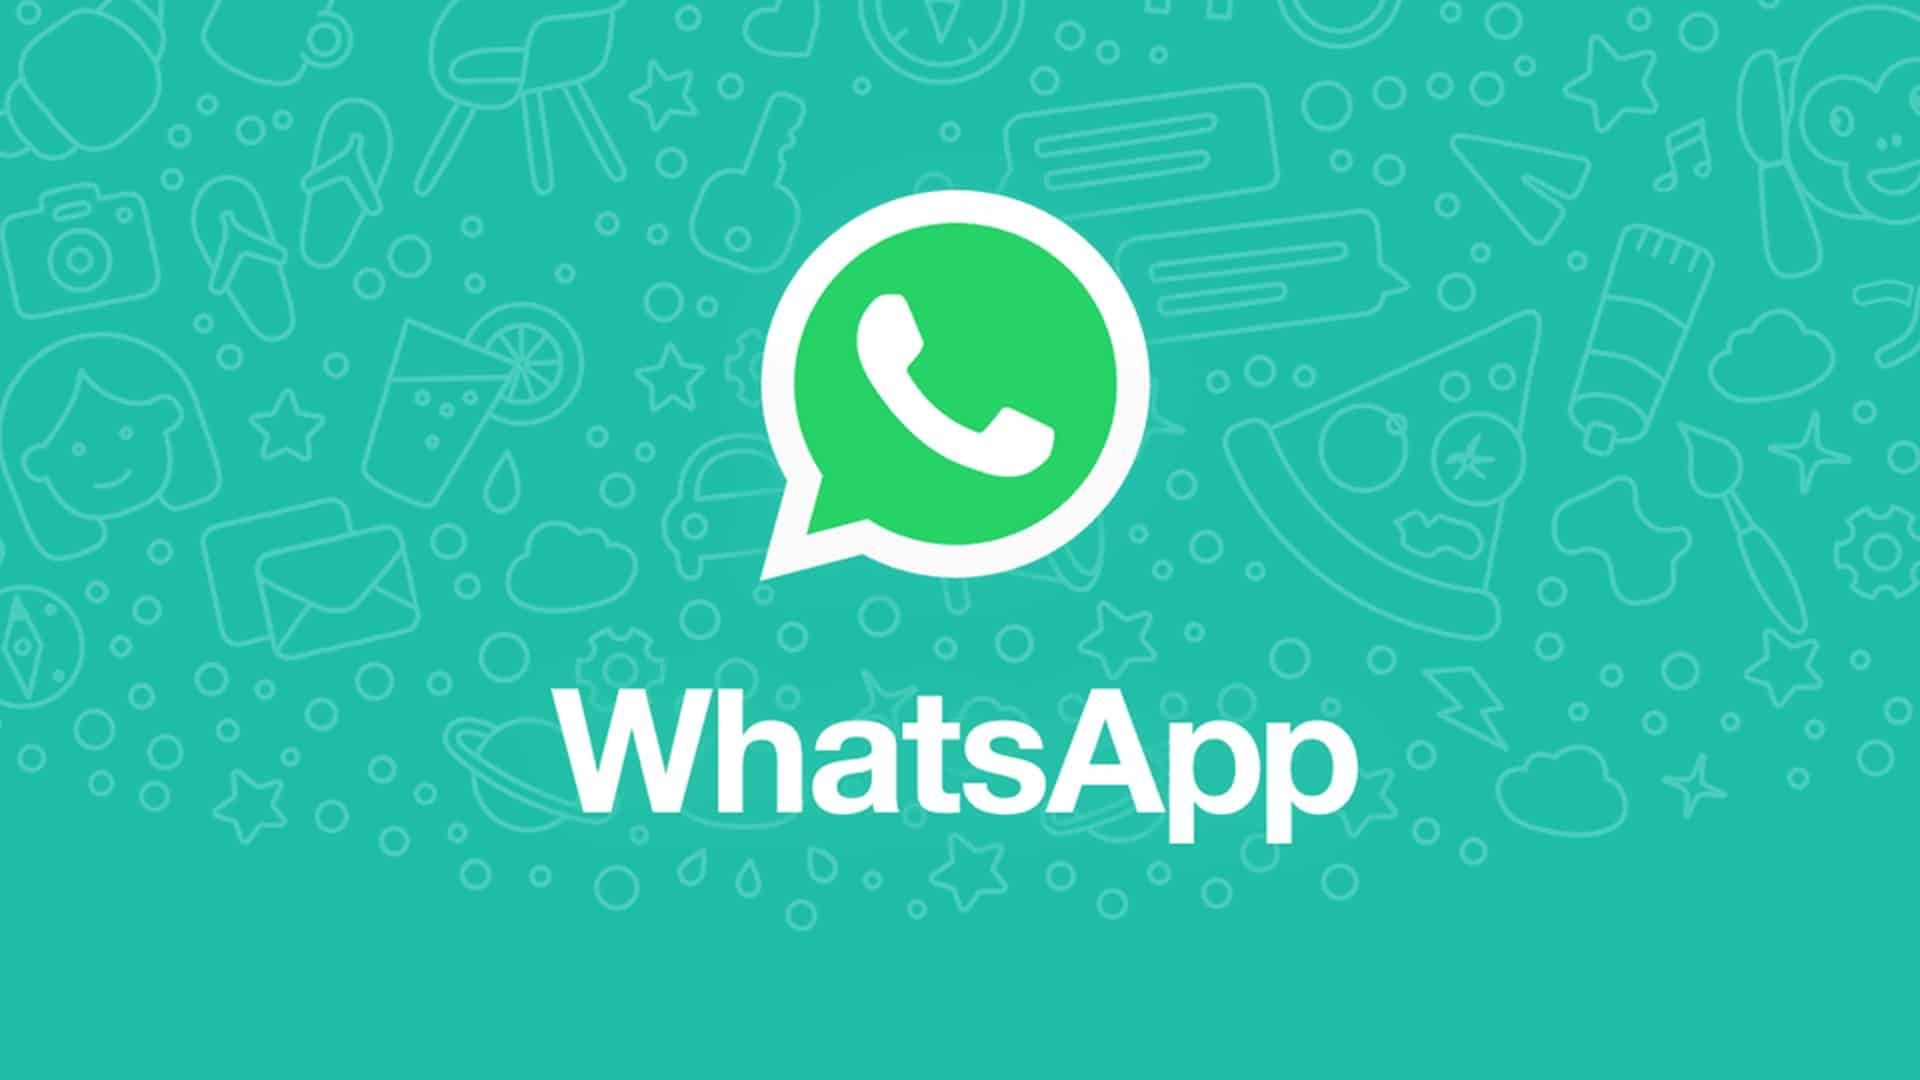 WhatsApp's new feature allows users to join ongoing calls directly from group chats